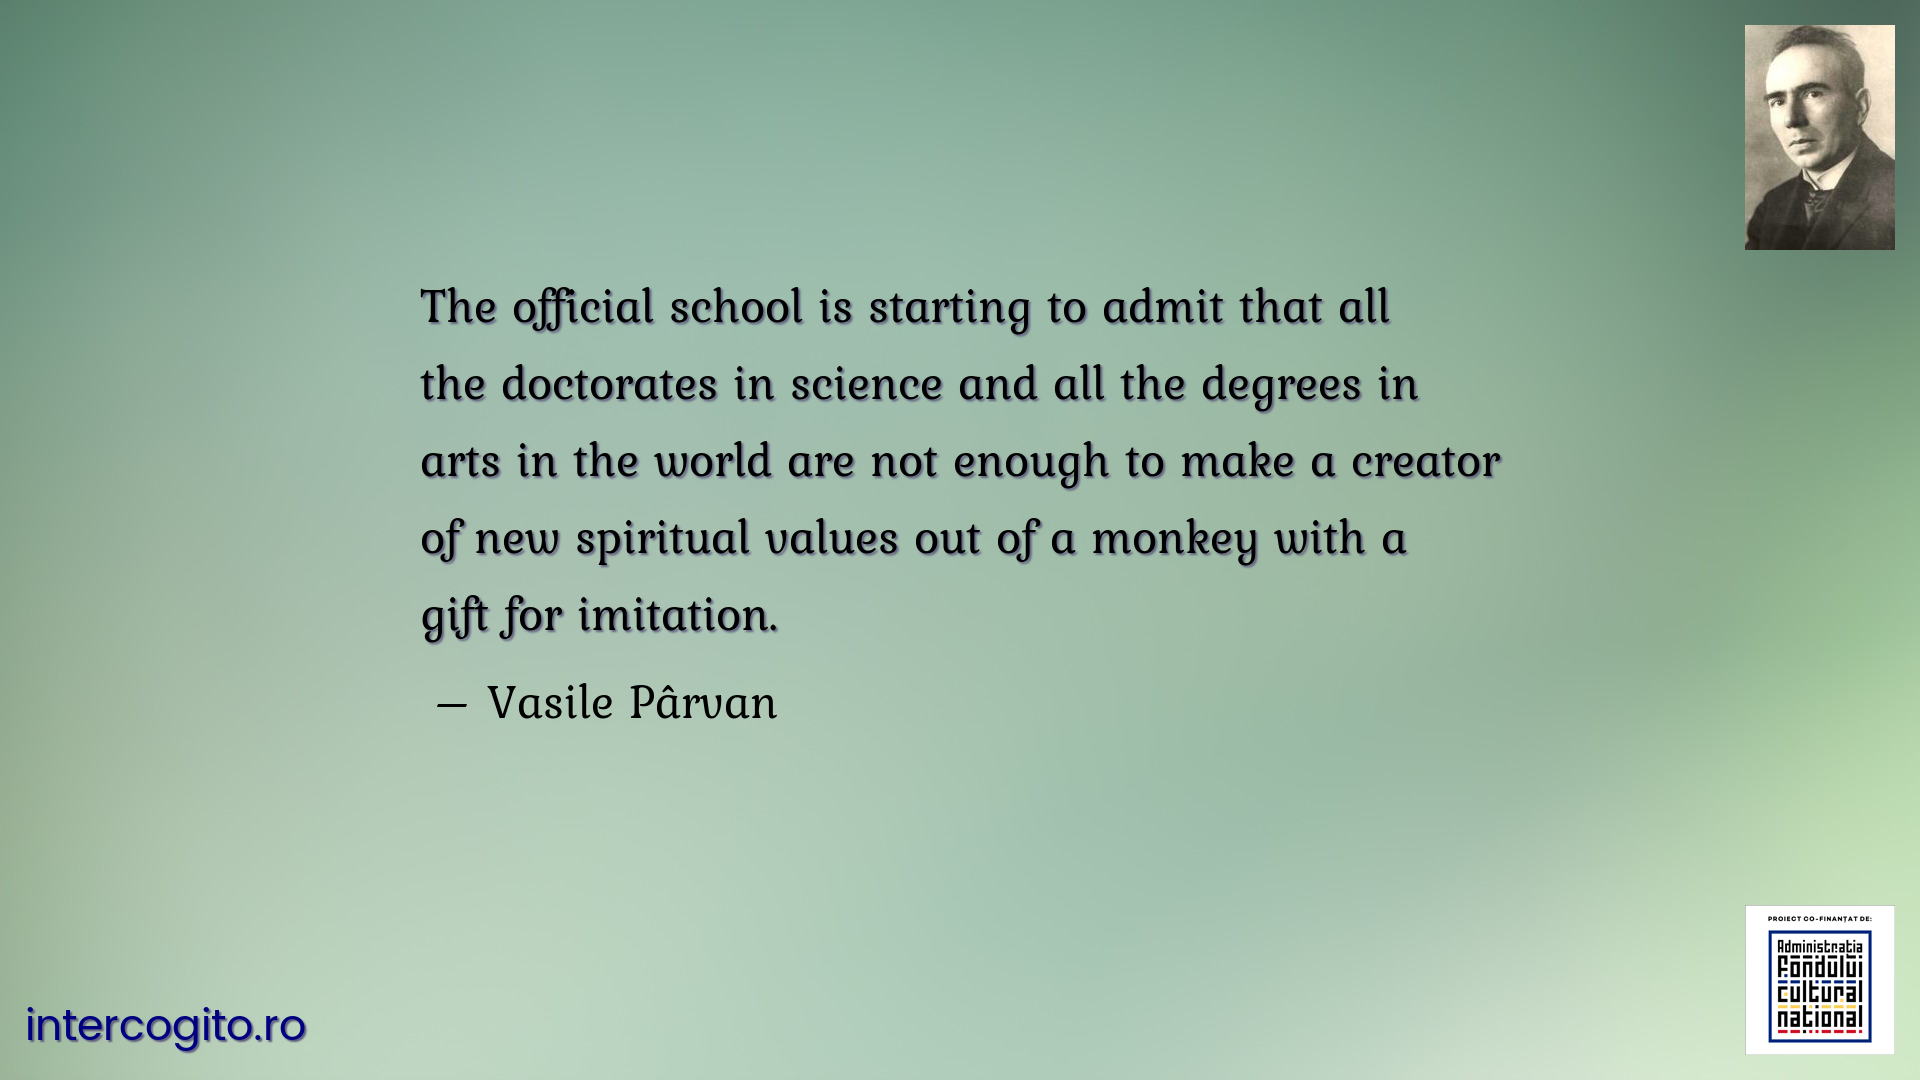 The official school is starting to admit that all the doctorates in science and all the degrees in arts in the world are not enough to make a creator of new spiritual values out of a monkey with a gift for imitation.